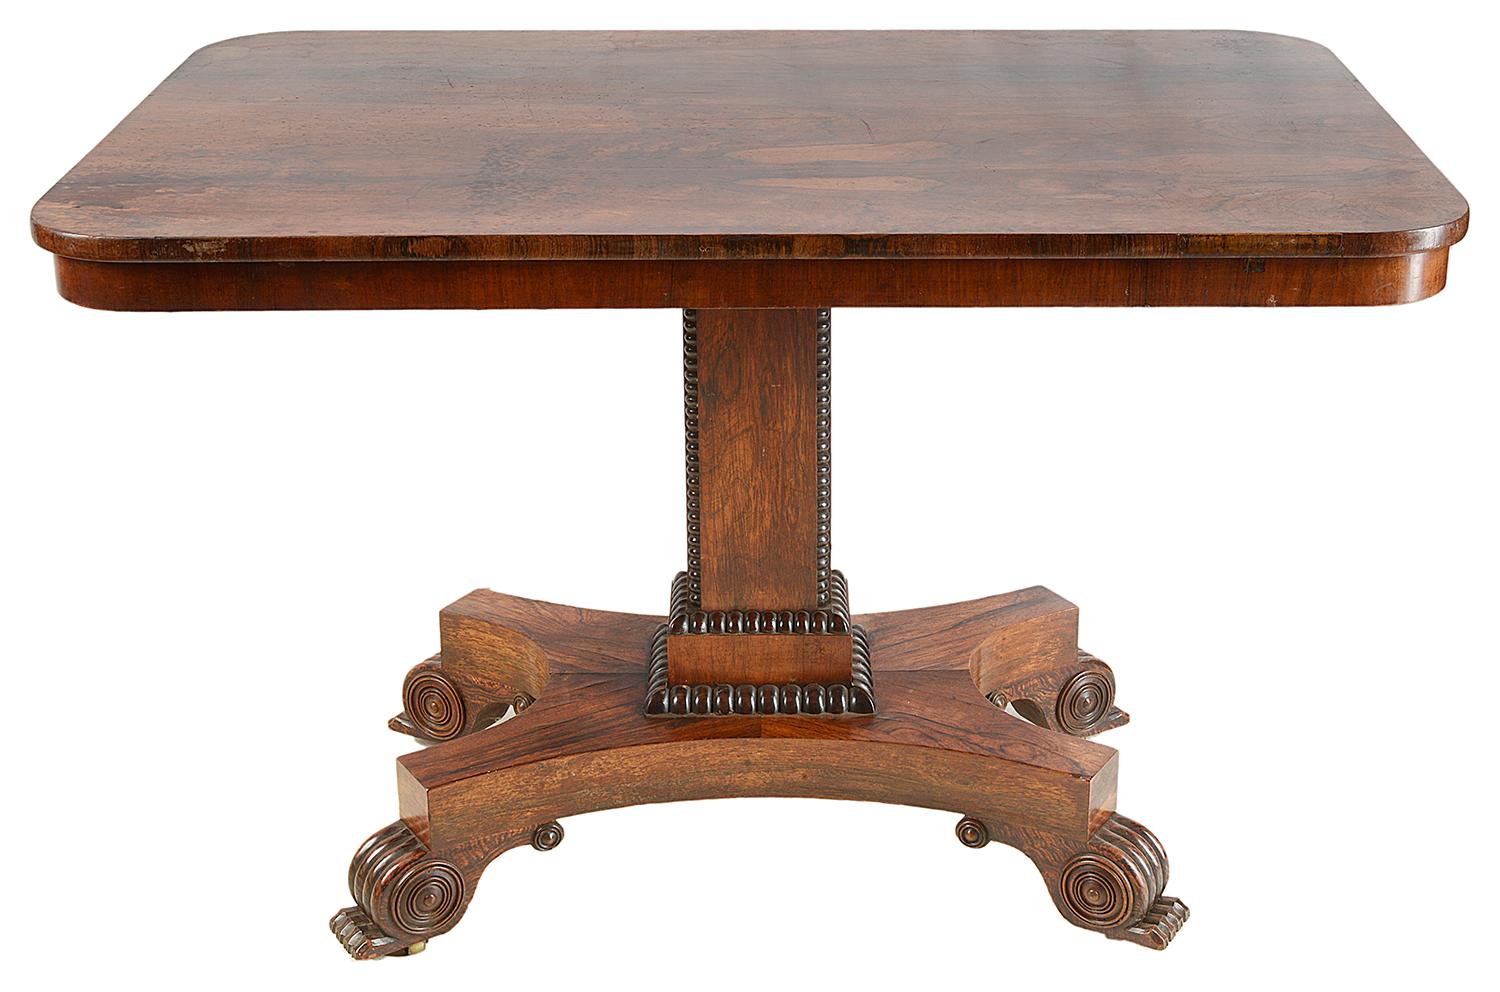 A good quality Regency period breakfast table, raised on a square section pedestal, platform base with carved scrolling feet.